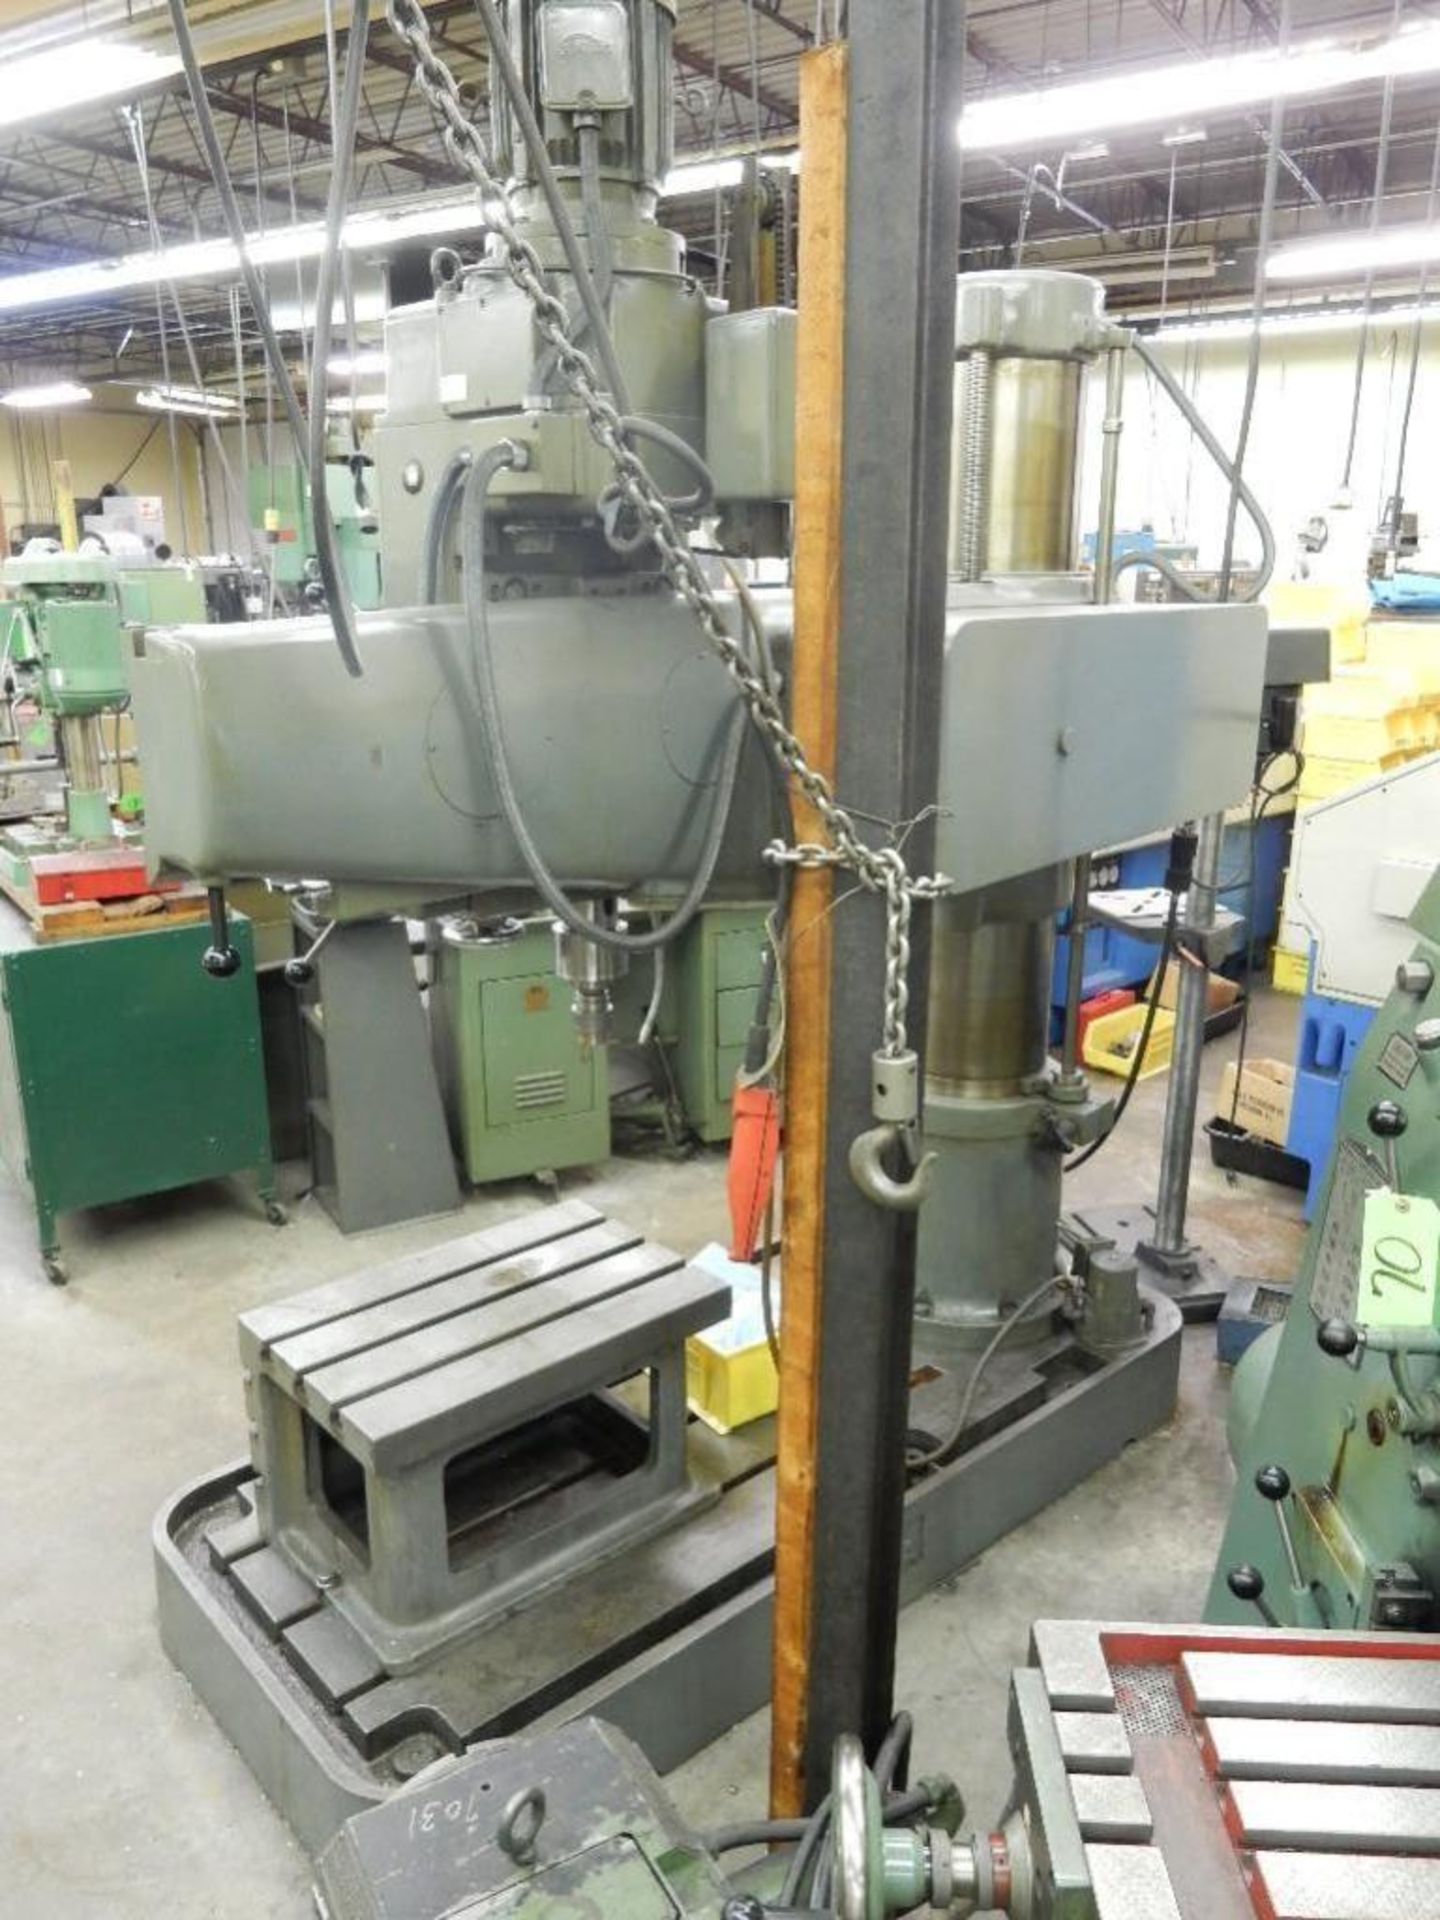 Ikeda Model RM-1375 Radial Arm Drill, 13" Column, 5' Arm, 30-1500 RPM Spindle Speeds, 26.5" - Image 3 of 27